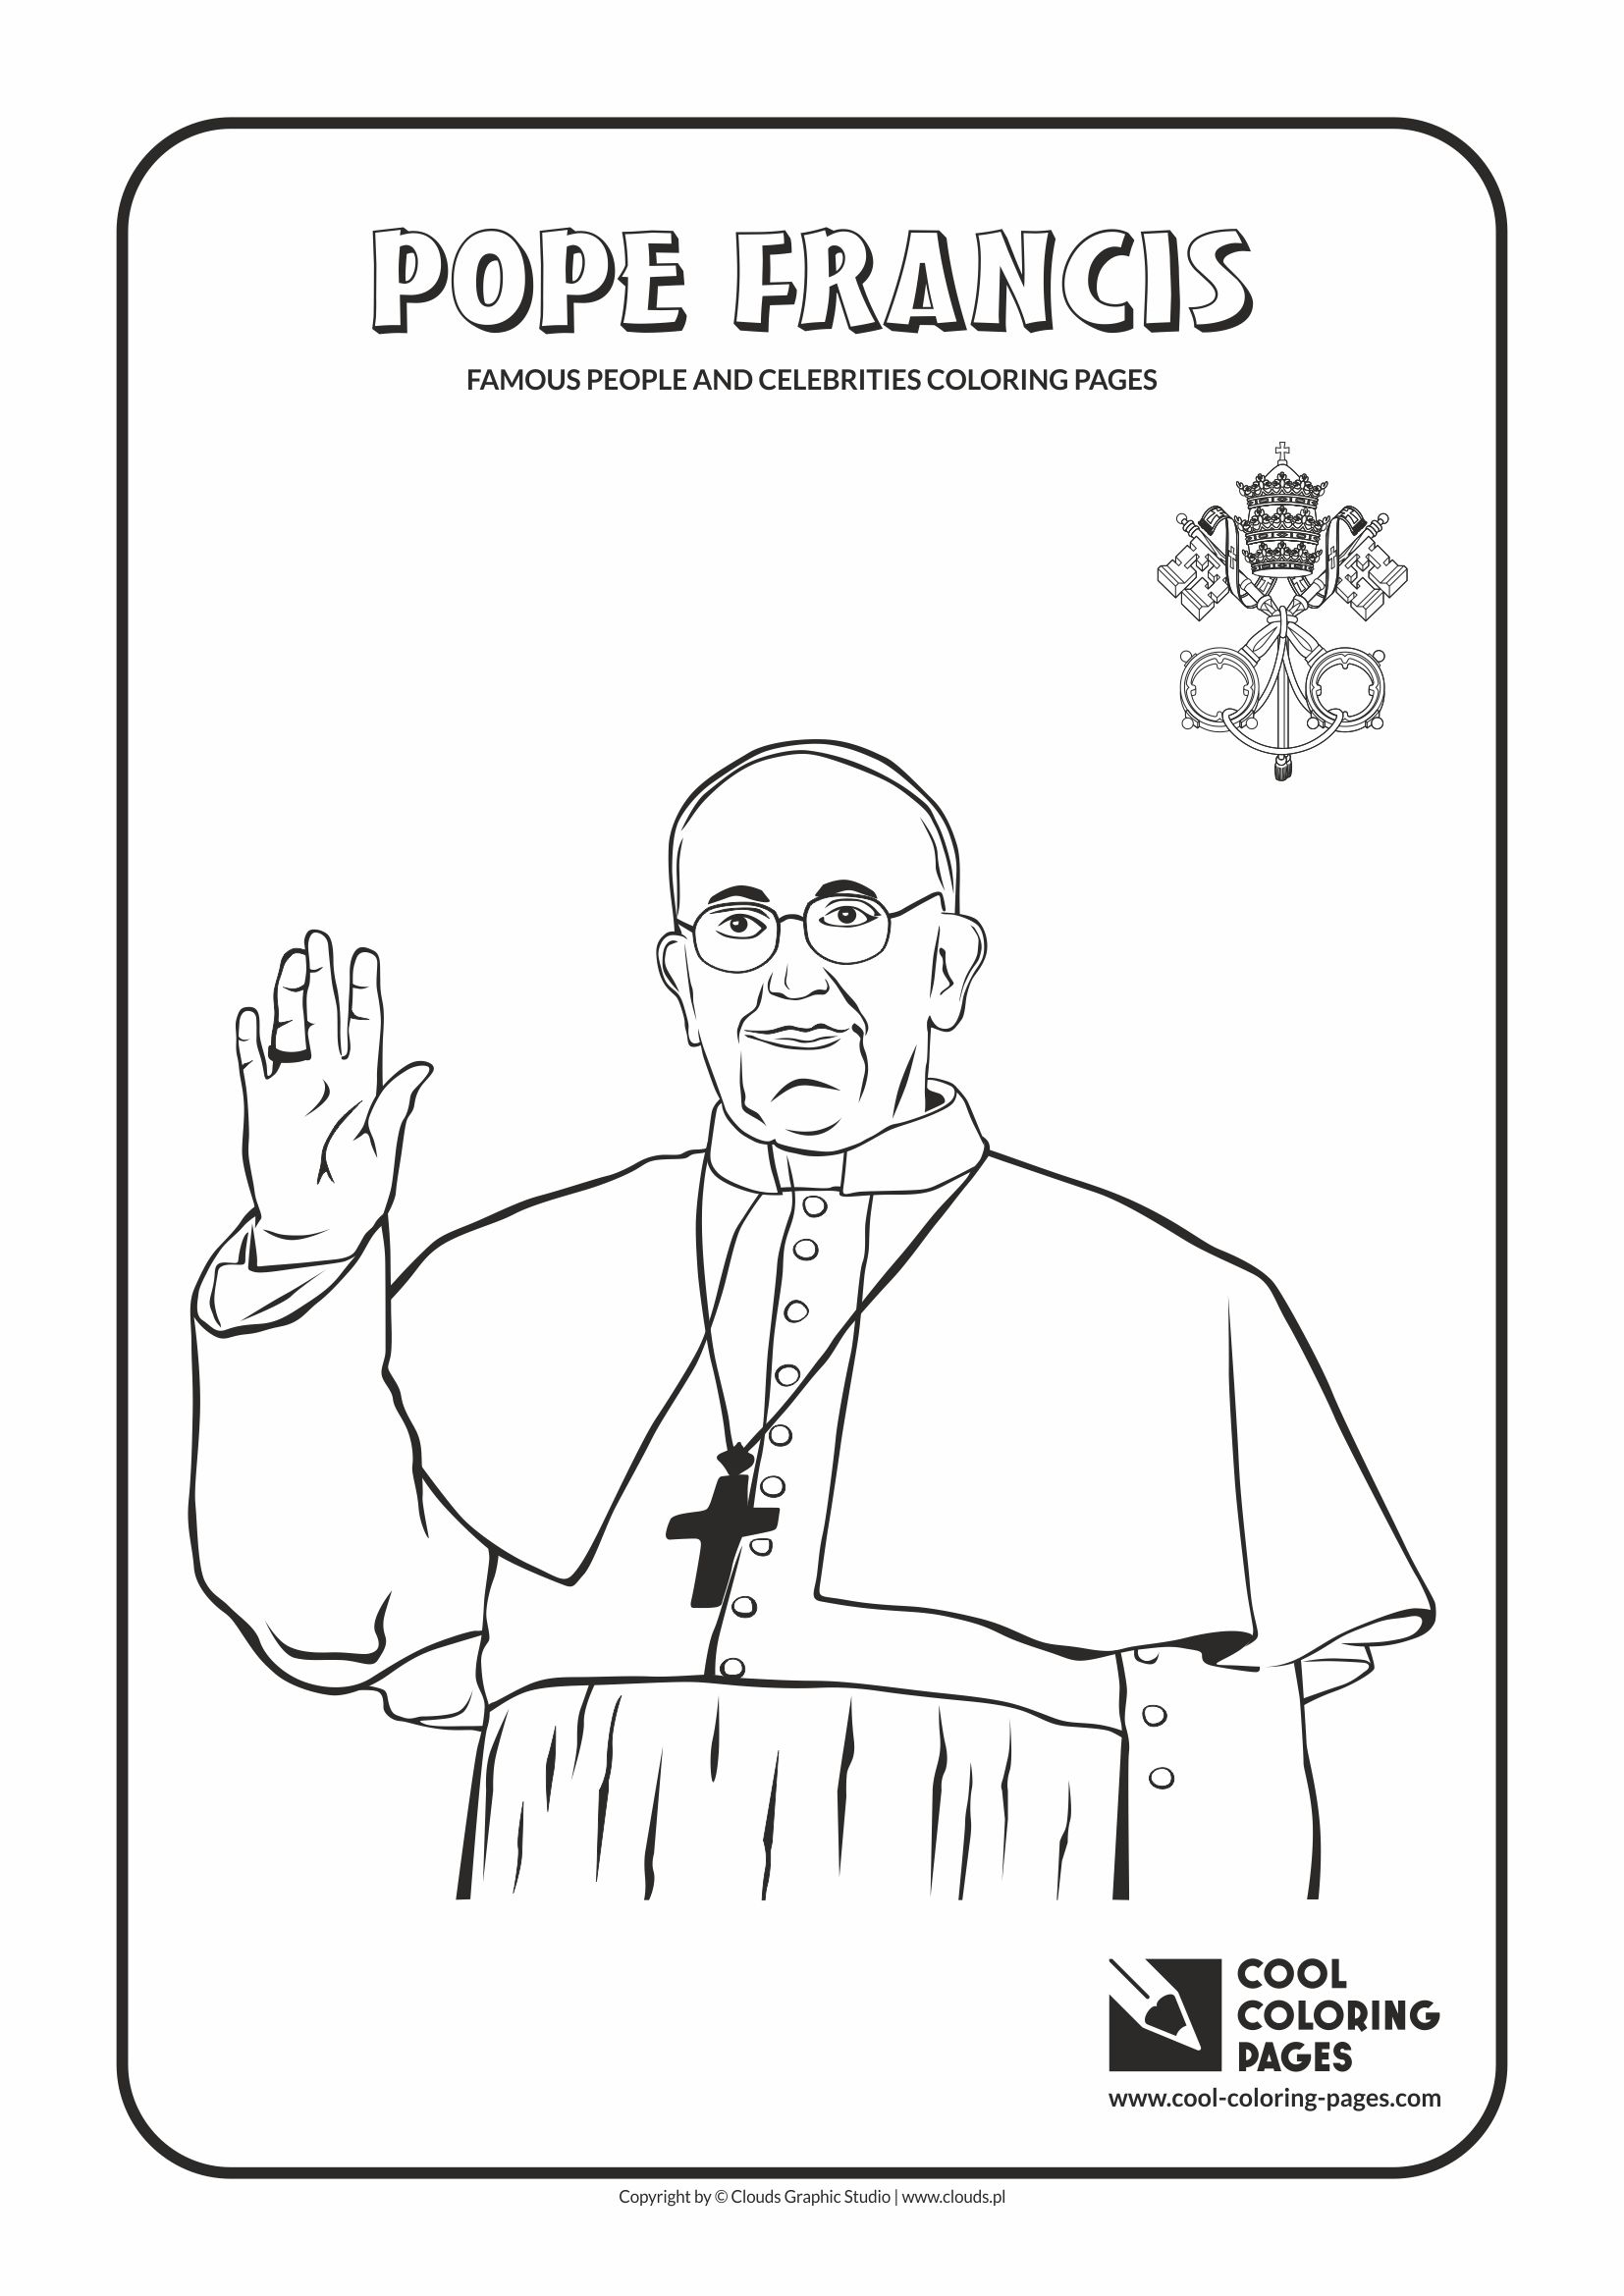 Cool Coloring Pages - Others / Pope Francis / Coloring page with Pope Francis